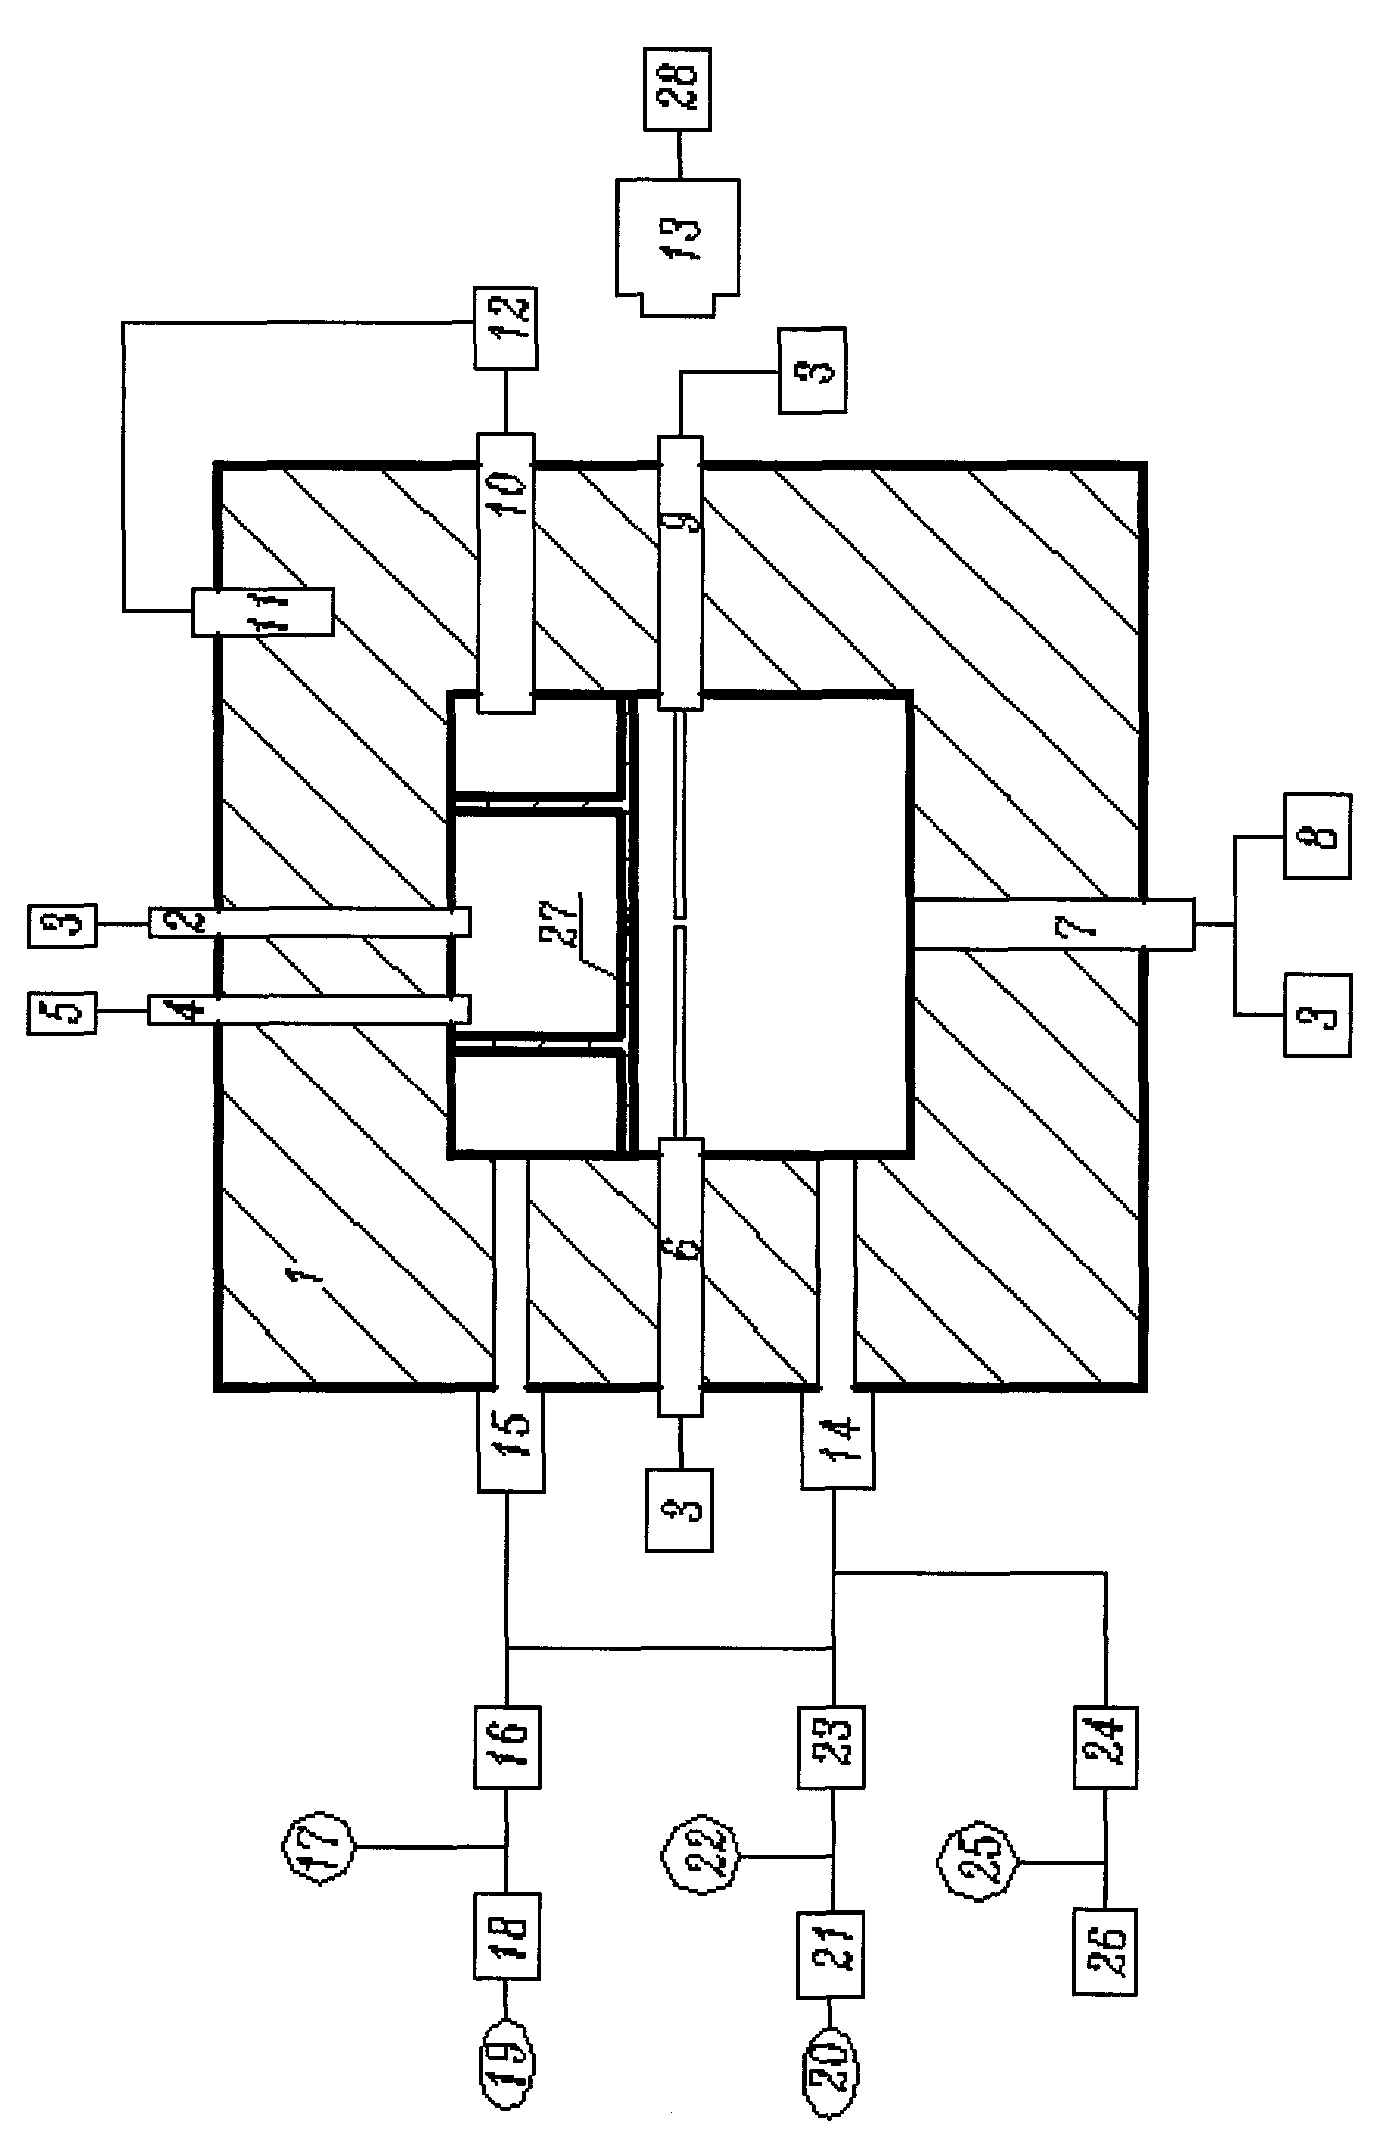 Gas fuel constant volume combustion chamber capable of being internally installed with diaphragm plate